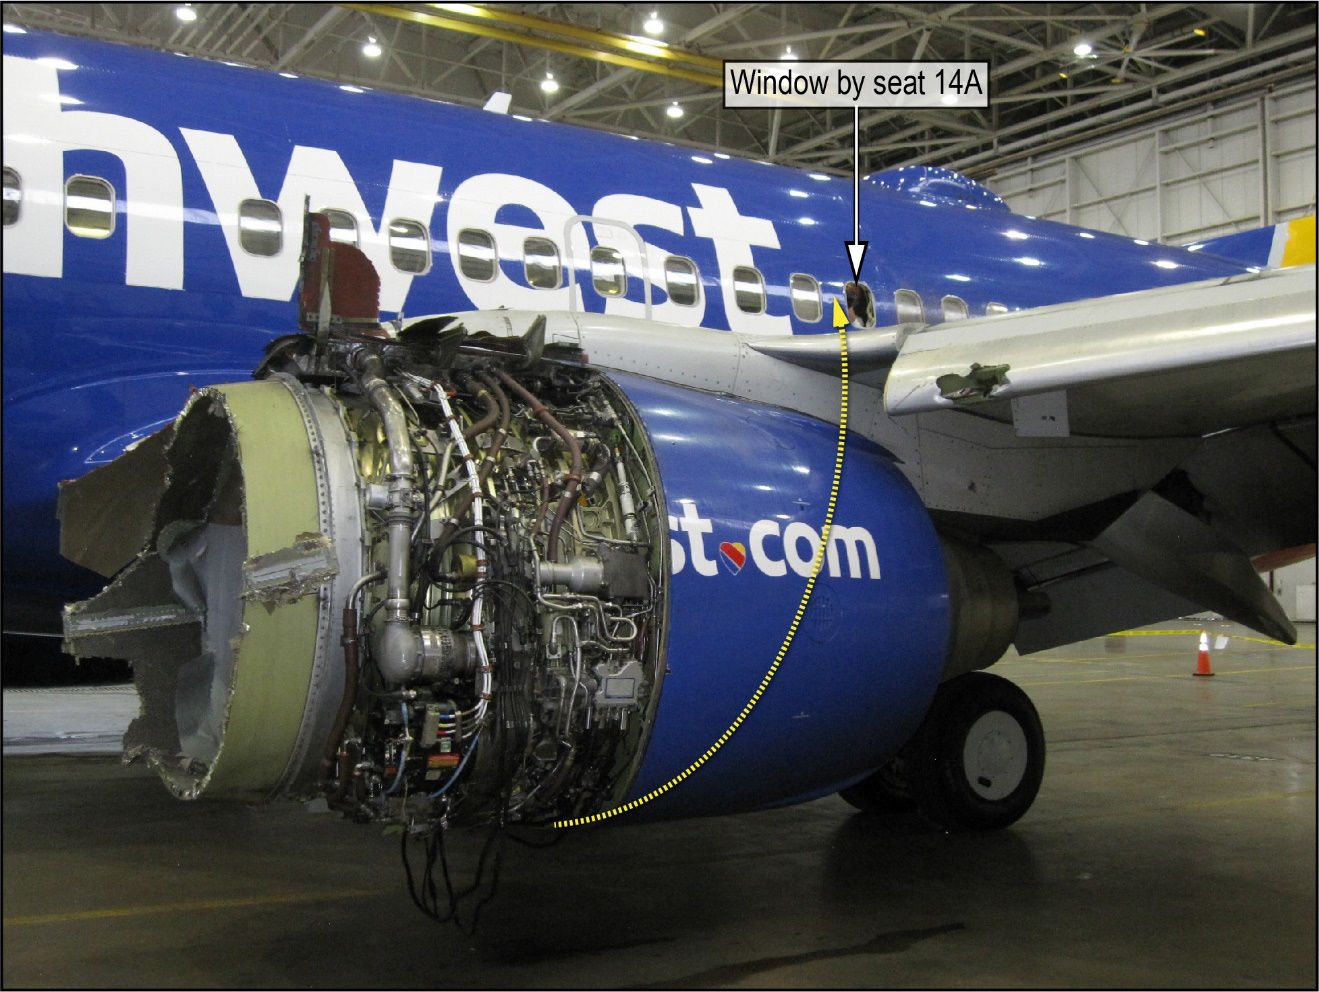 Boeing 737-700 engine cowling and nacelles